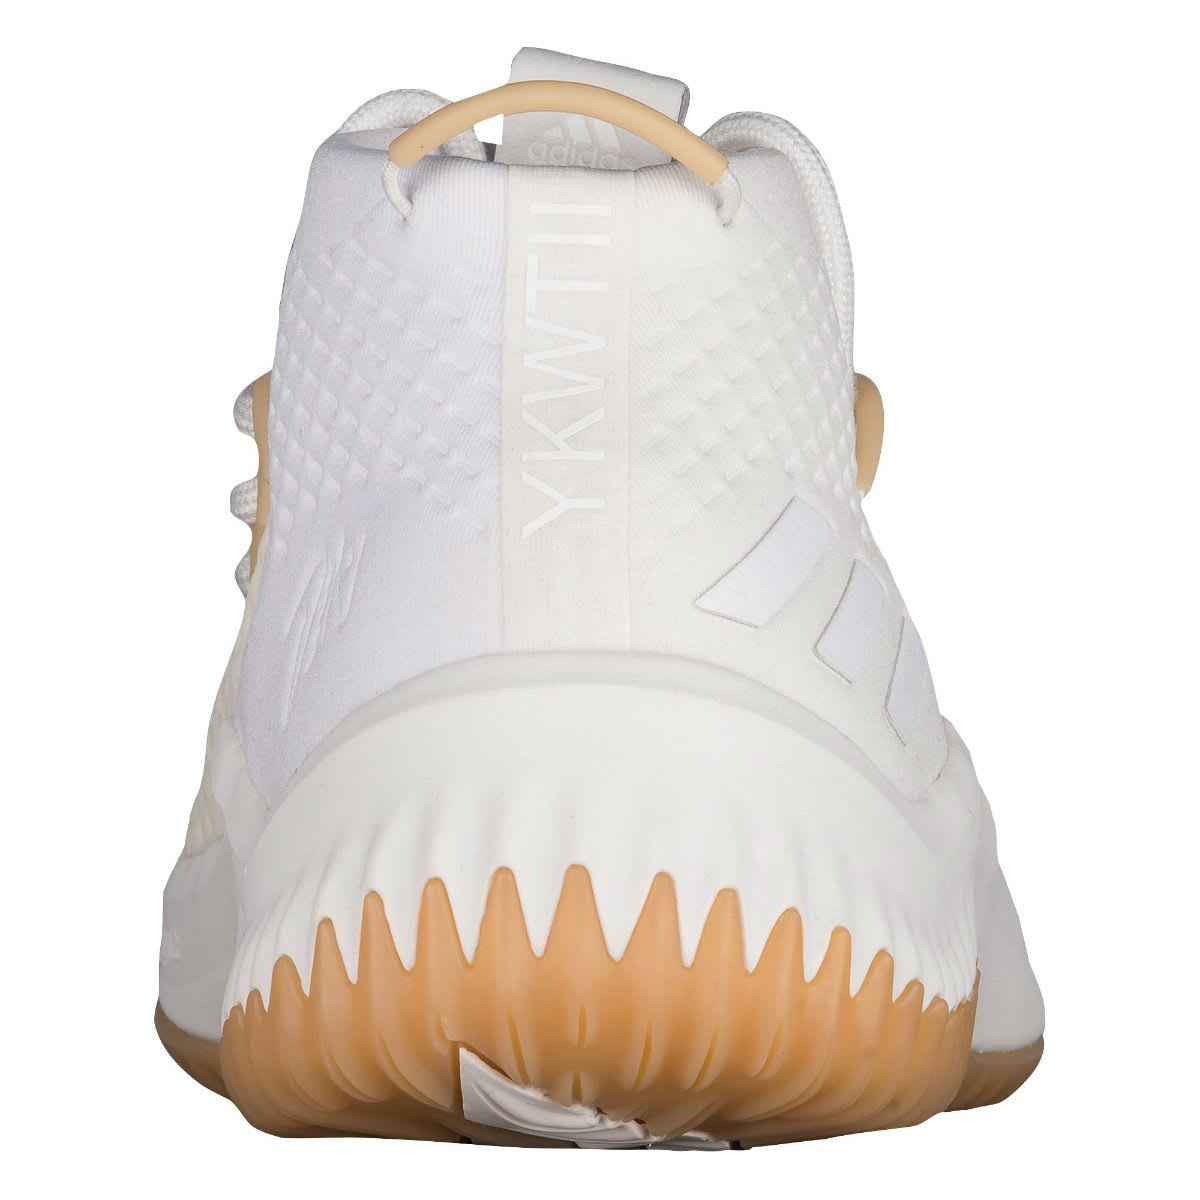 Adidas Dame 4 White Gum Release Date Heel BY4496